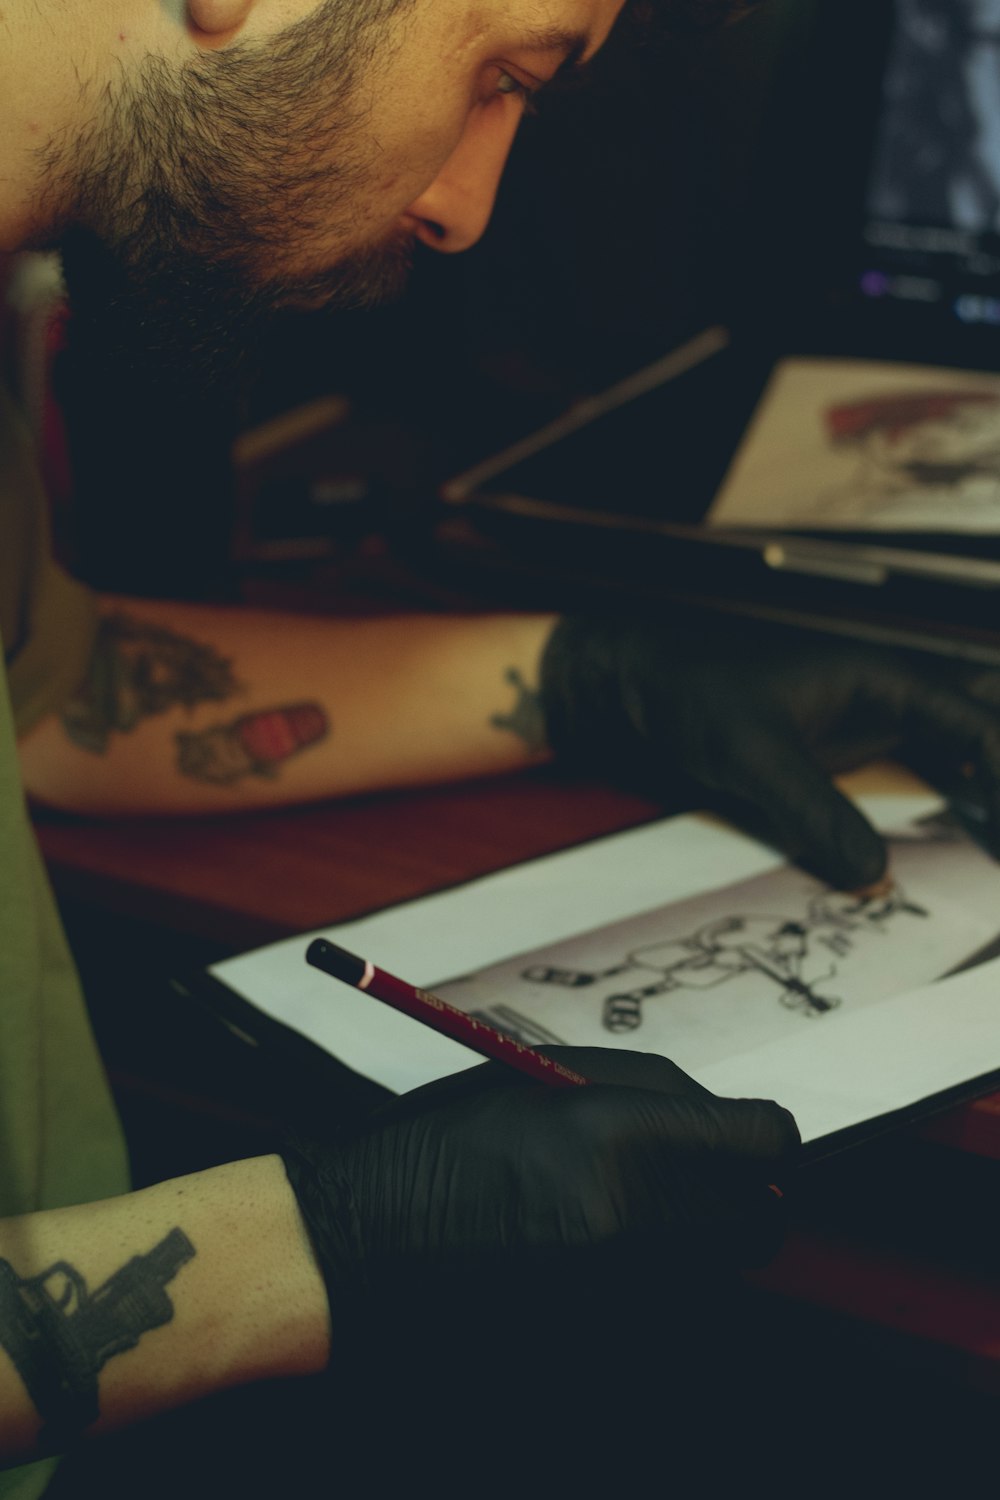 a man with a tattoo on his arm is looking at a drawing